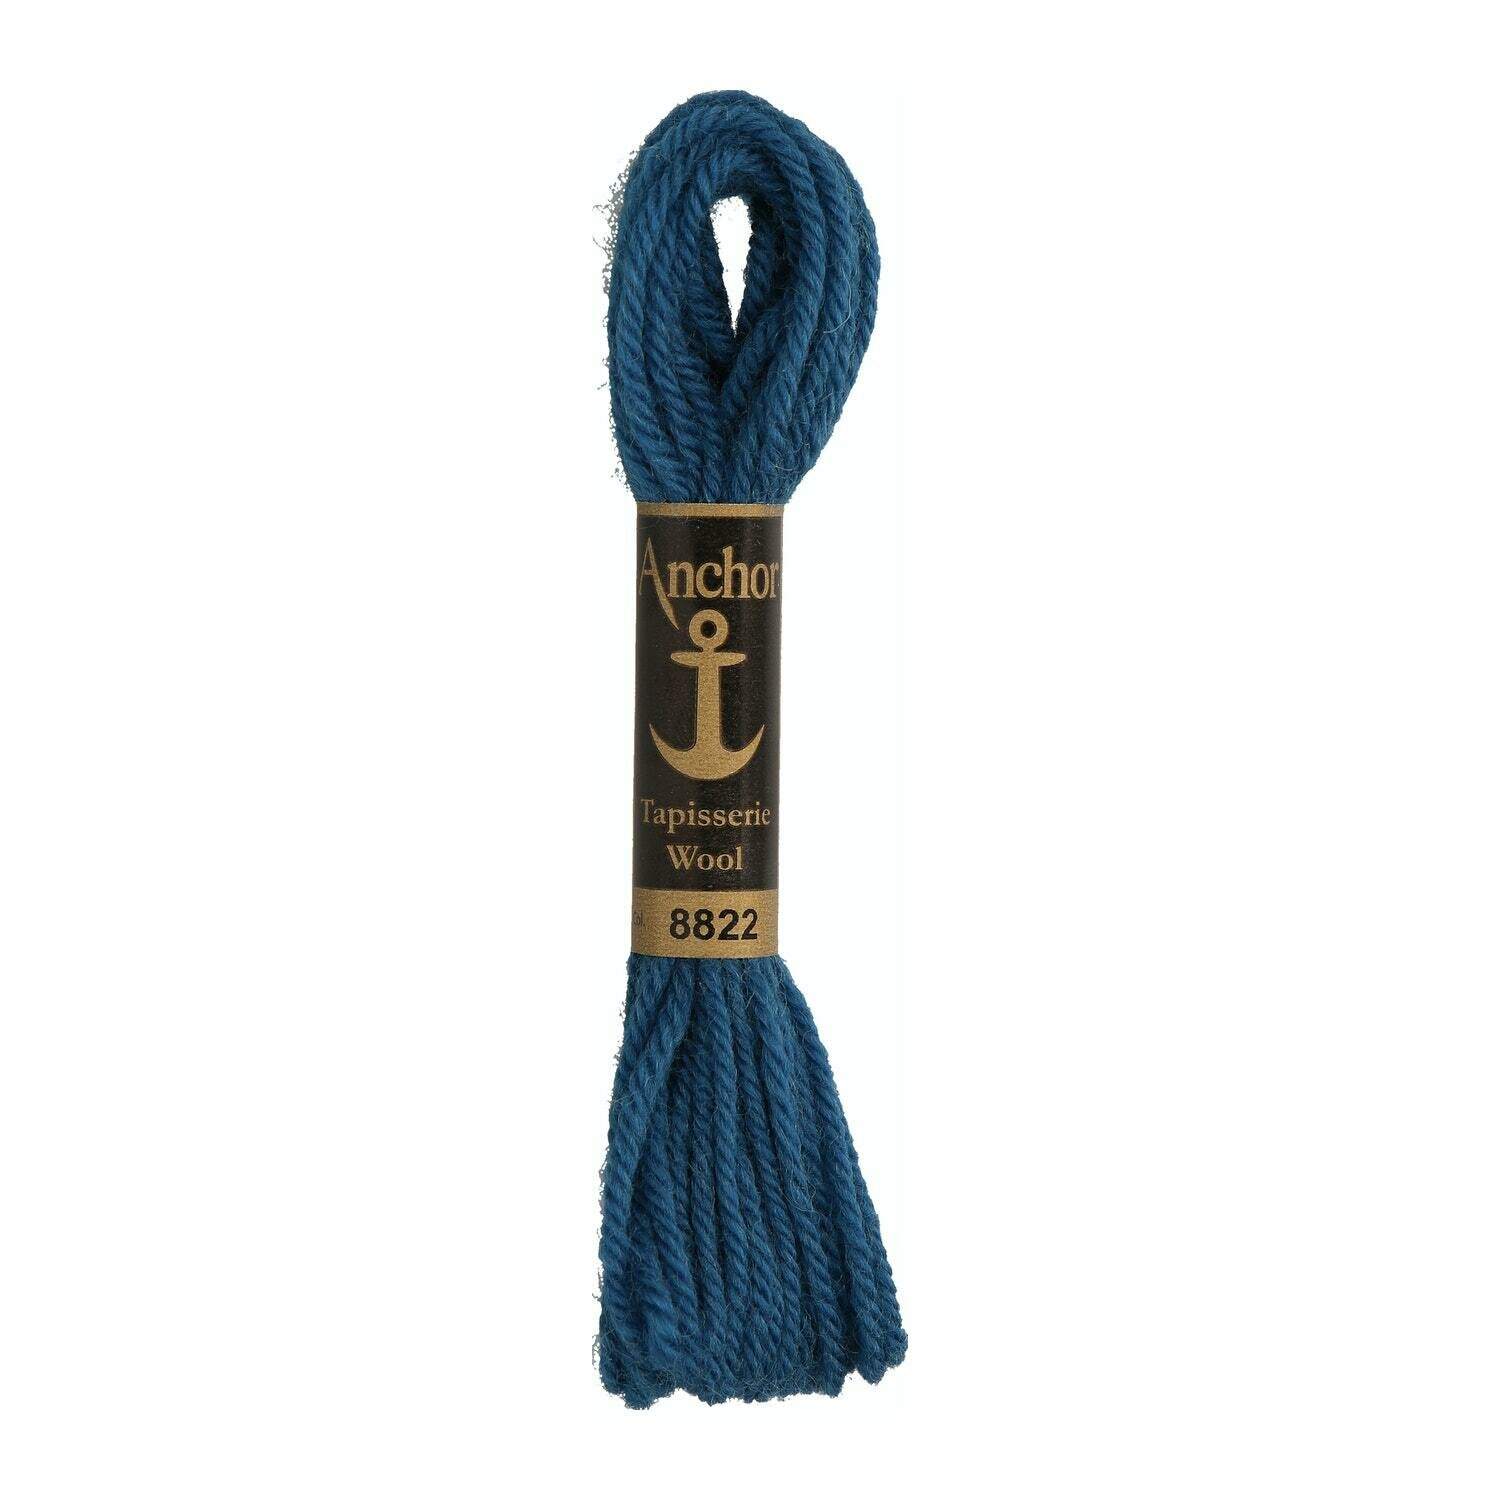 Anchor Tapisserie Wool # 08822